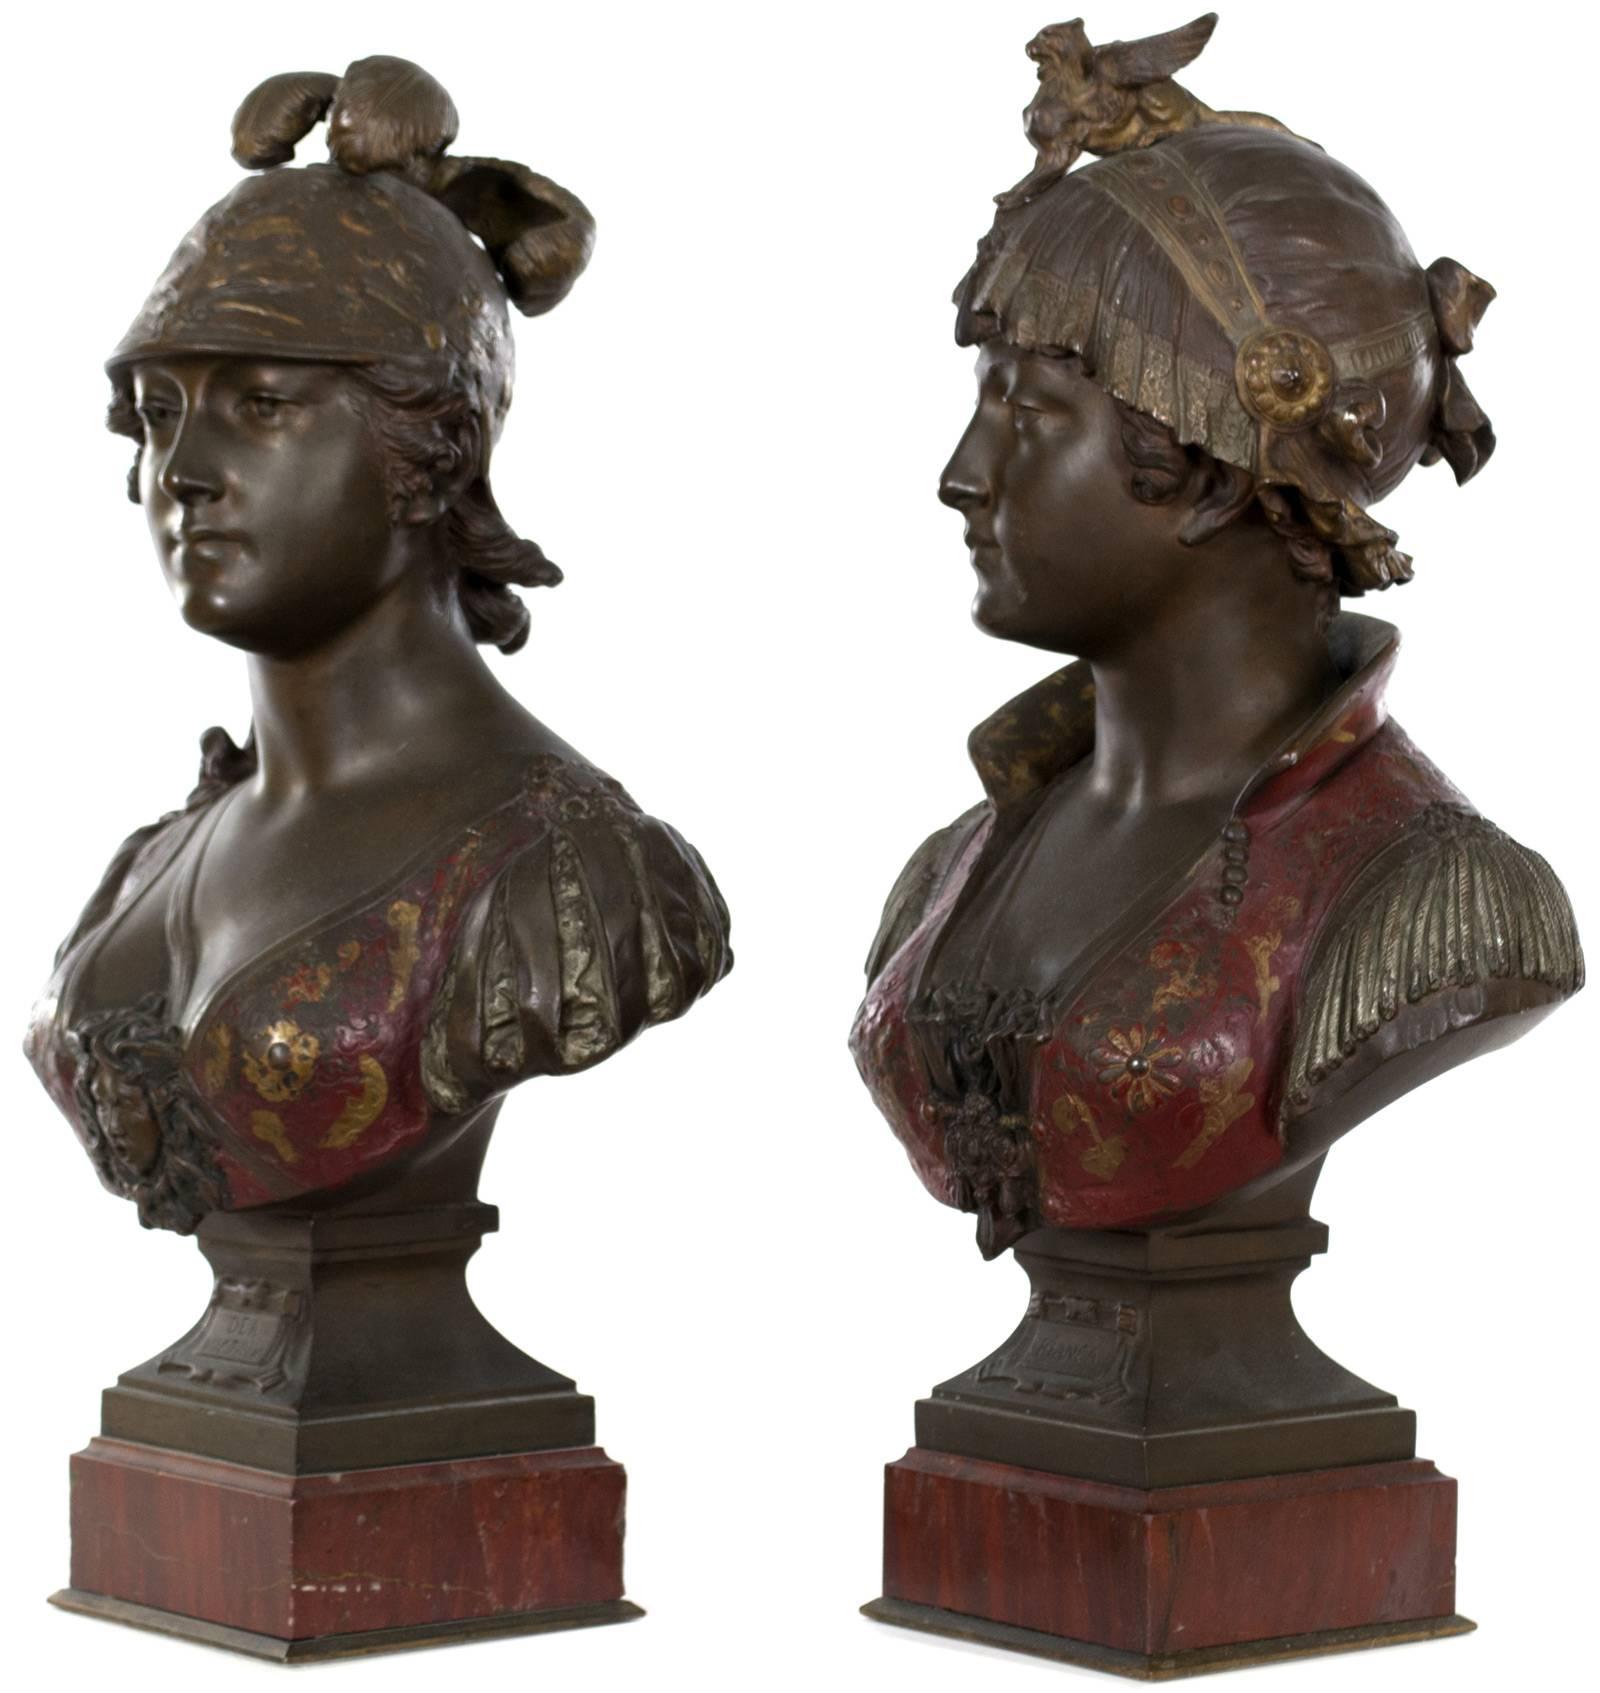 A pair of polychromed bronze sculptures by Cesar Constantino Ceribelli (Italian, 1841-1918), who trained at the French Academy in Rome and regularly showed works at the prestigious Paris Salon des artists français. These two sculptures are among